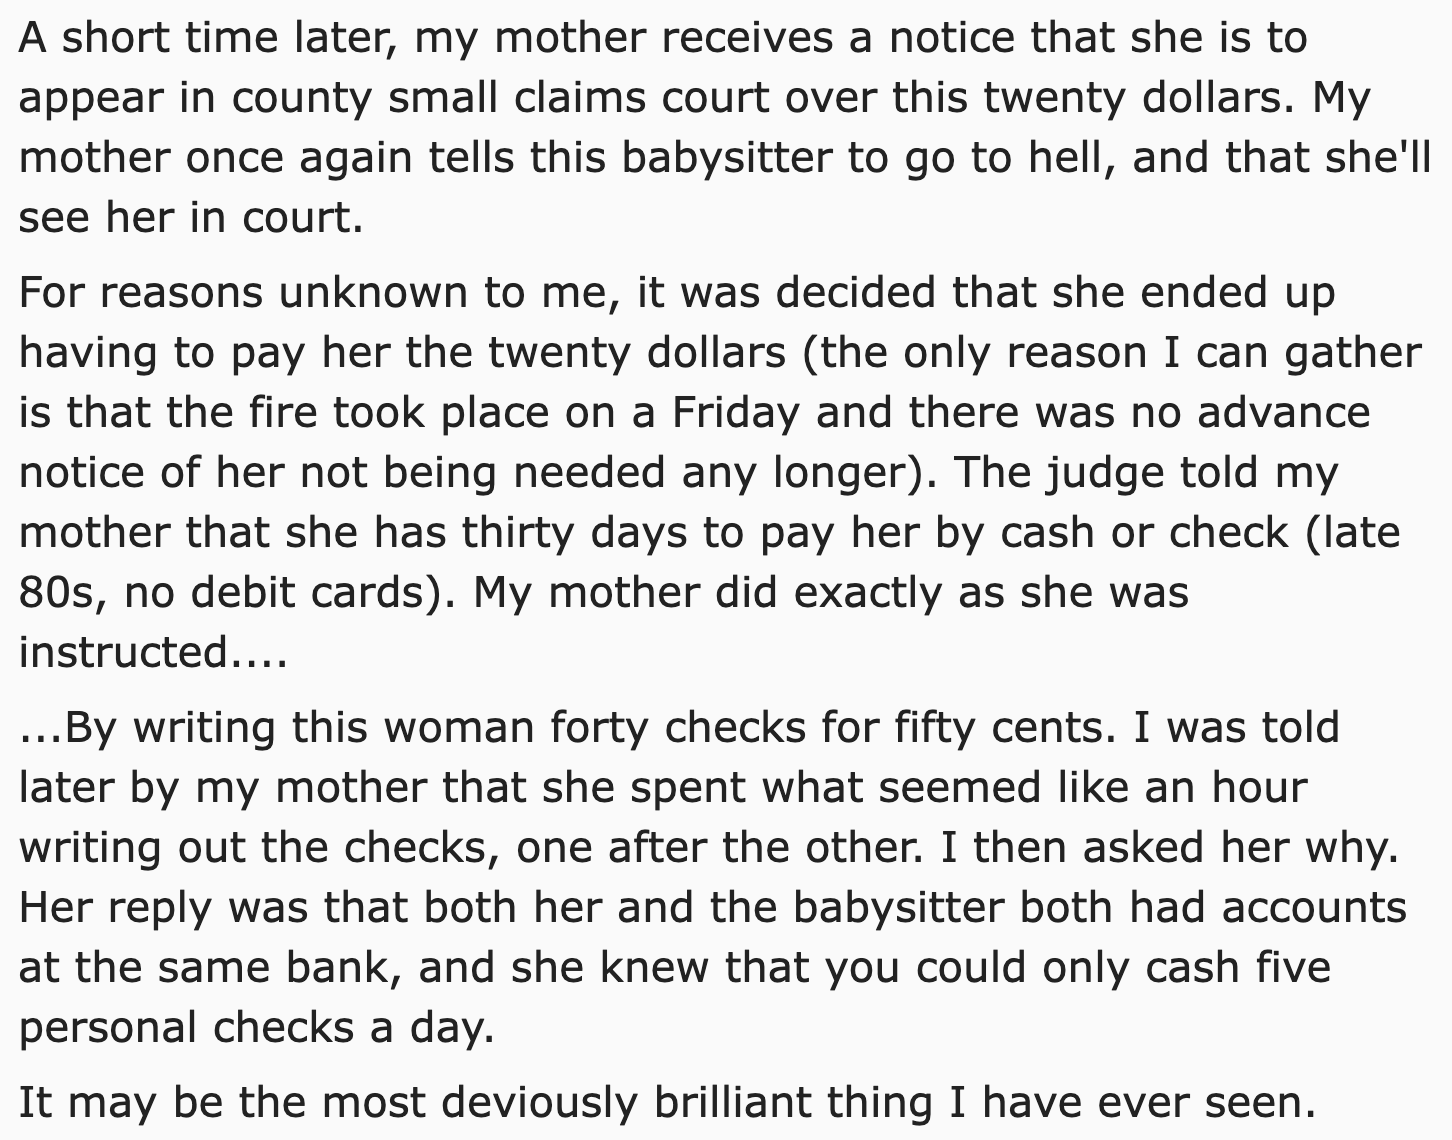 malicious compliance reddit thread - Tool - A short time later, my mother receives a notice that she is to appear in county small claims court over this twenty dollars. My mother once again tells this babysitter to go to hell, and that she'll see her in c